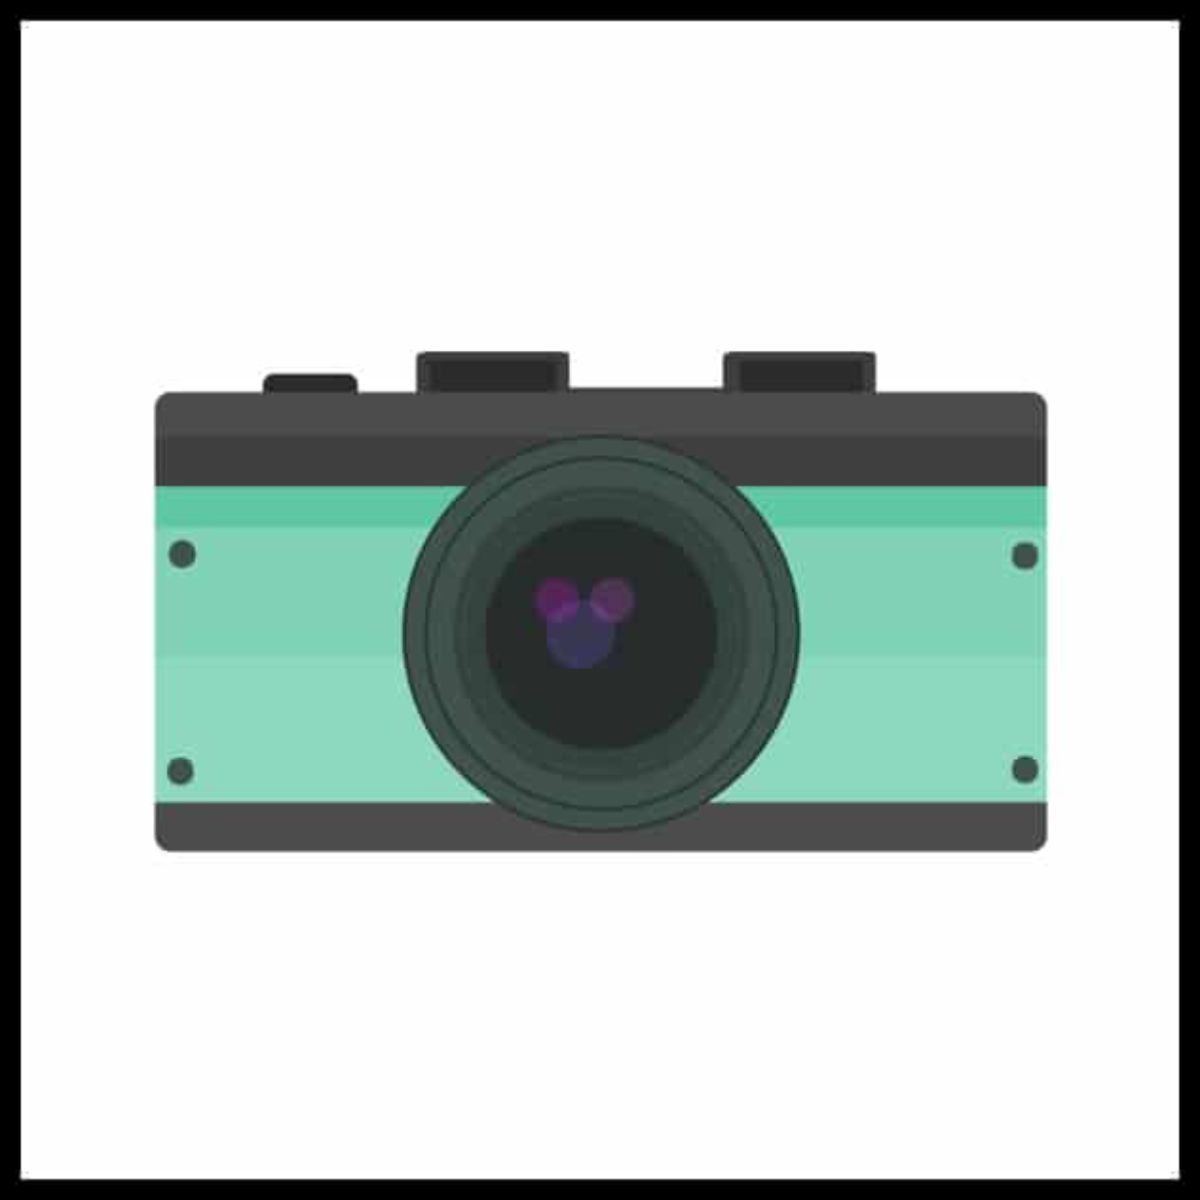 A green camera icon on a white background for a Photo Scavenger Hunt.